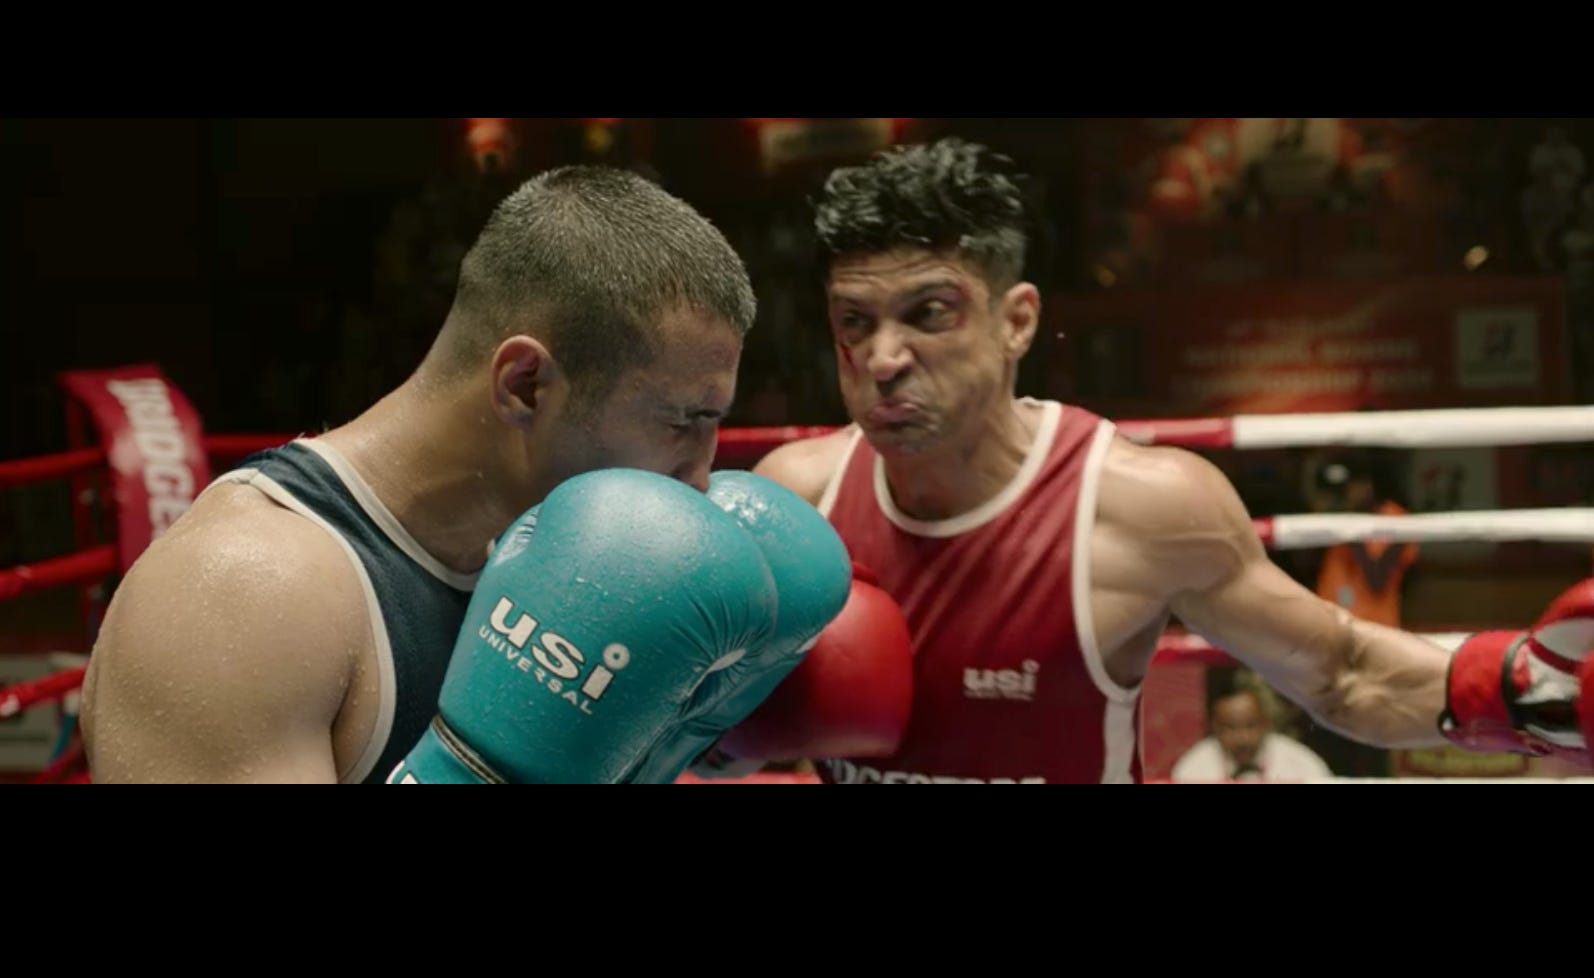 Chess boxing catching on in India - BBC News